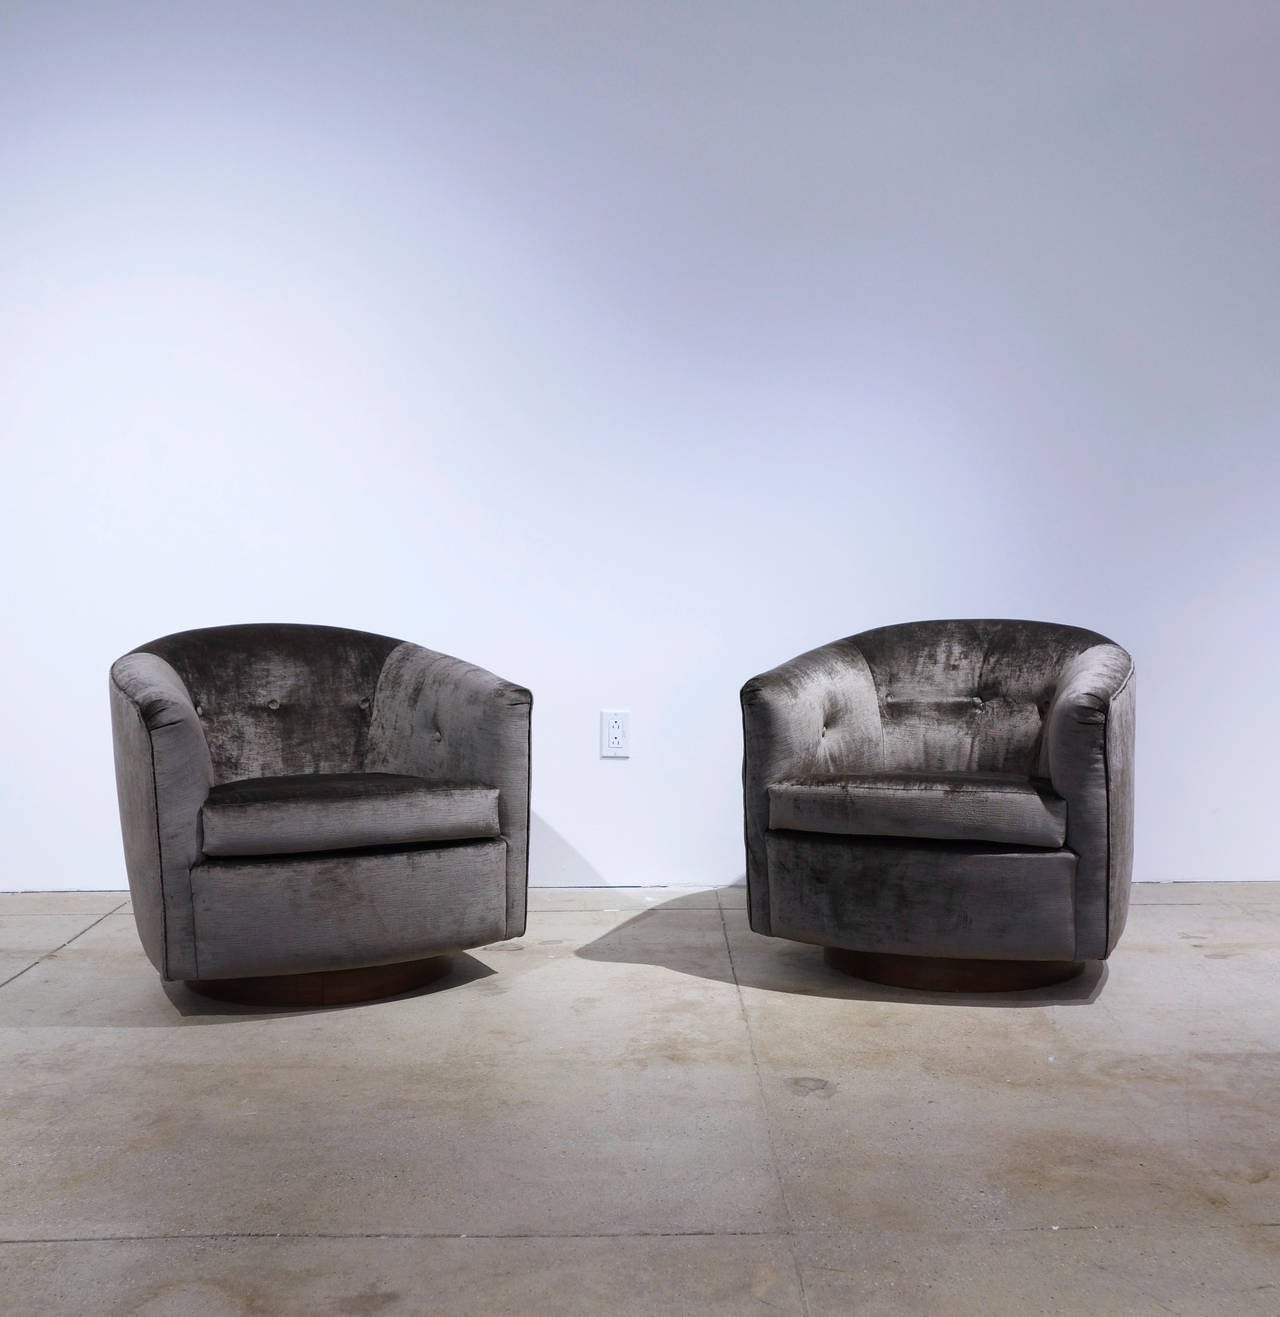 American Pair of Swivel Chairs by Milo Baughman